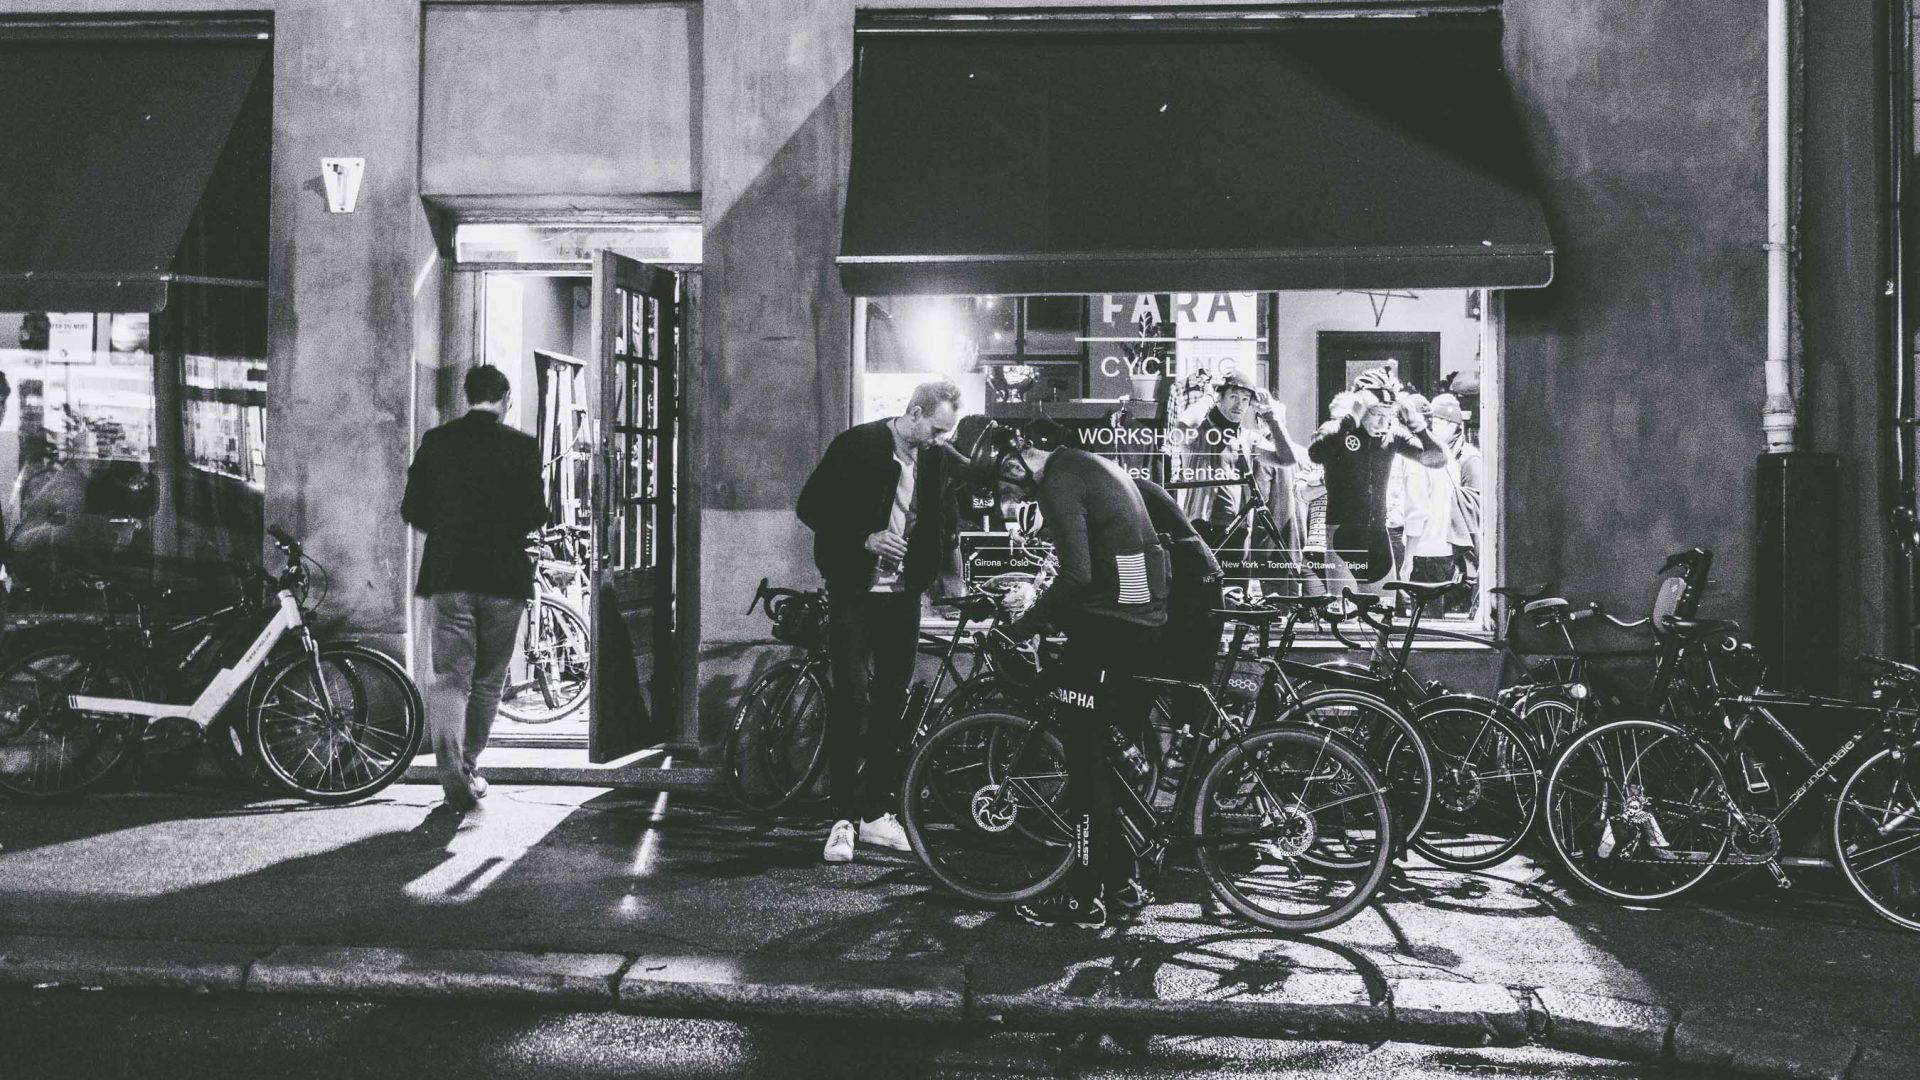 Bike riders work on their bikes outside a shop front.